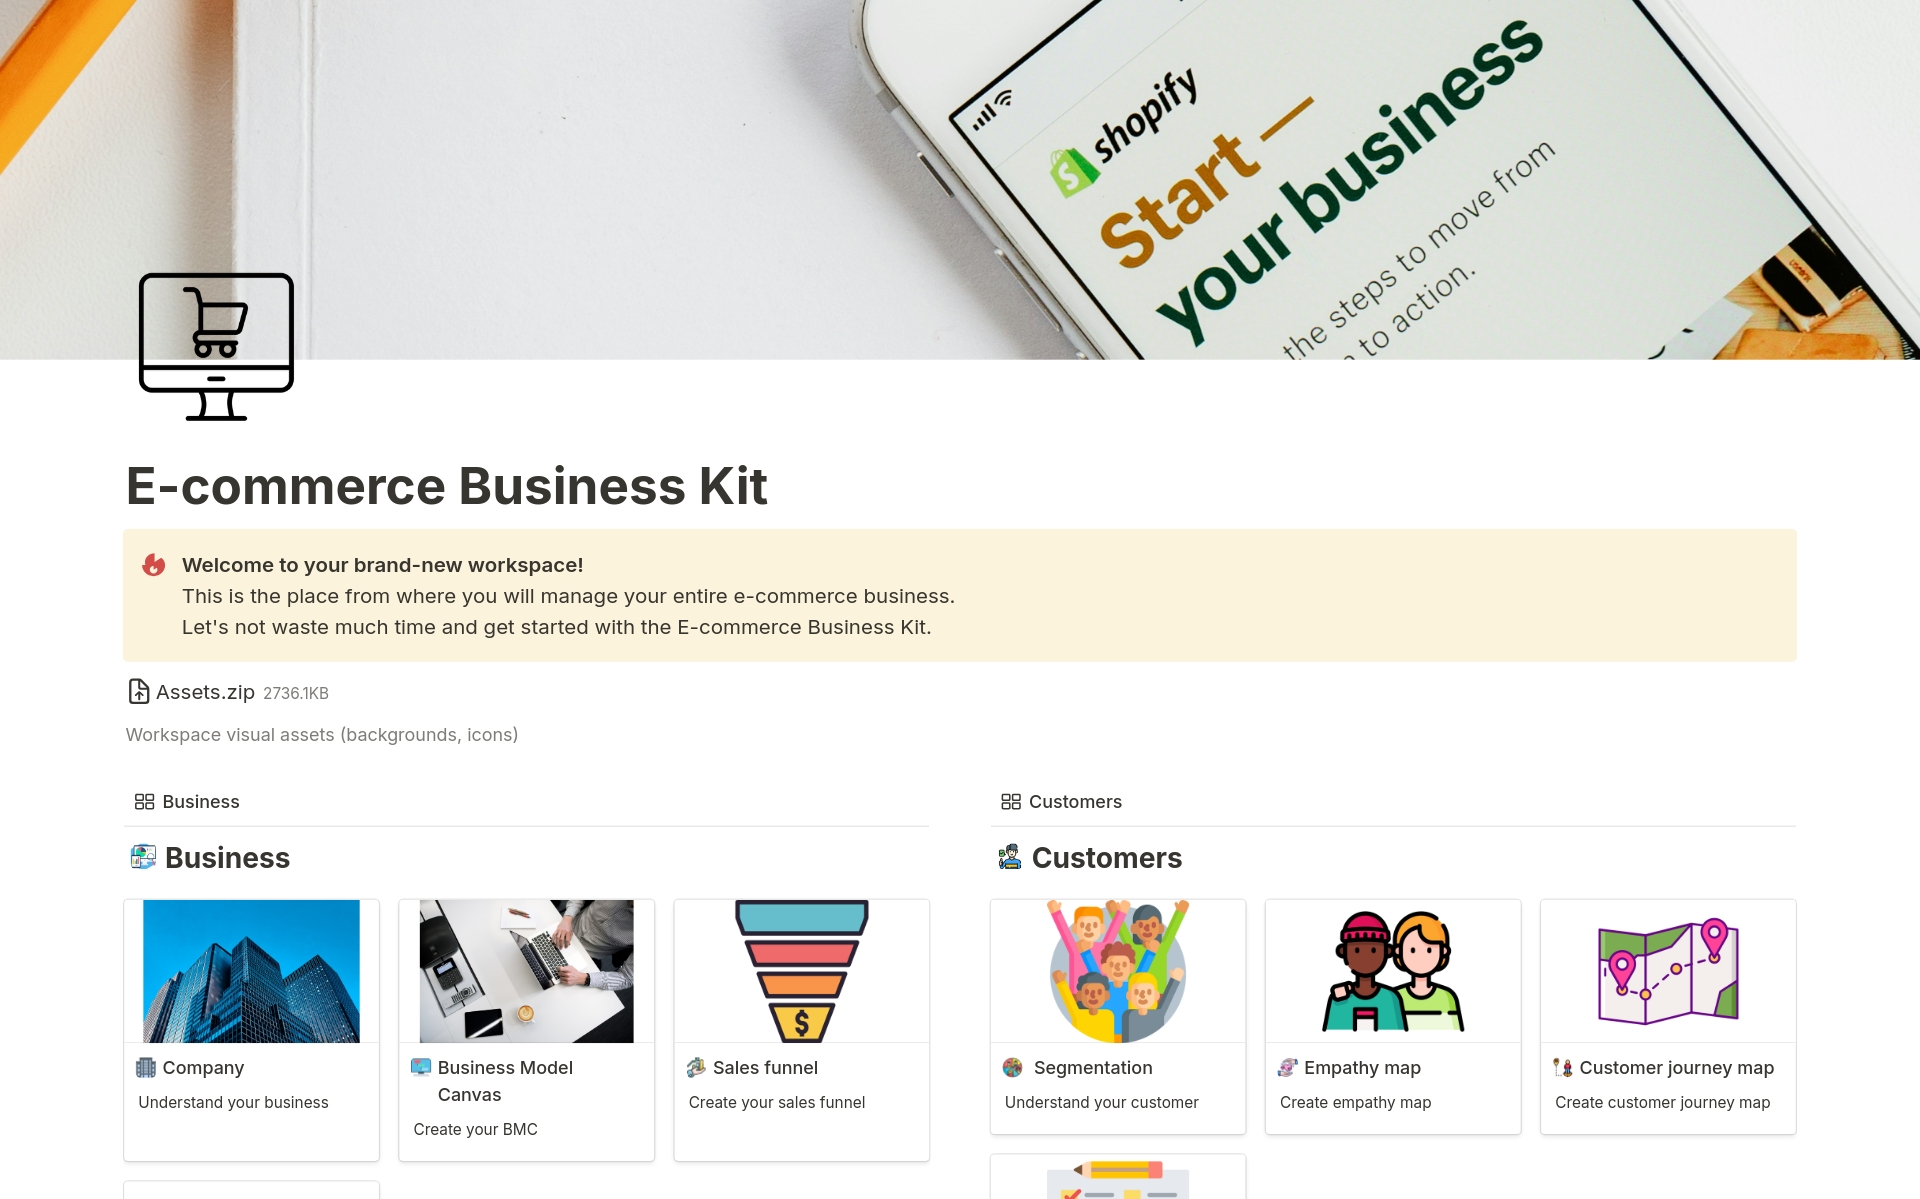 Your Path to E-commerce Domination Starts Here! Harness the Power of The E-commerce Business Kit Notion Template to Manage and Rapidly Grow Your Online Business Effortlessly.